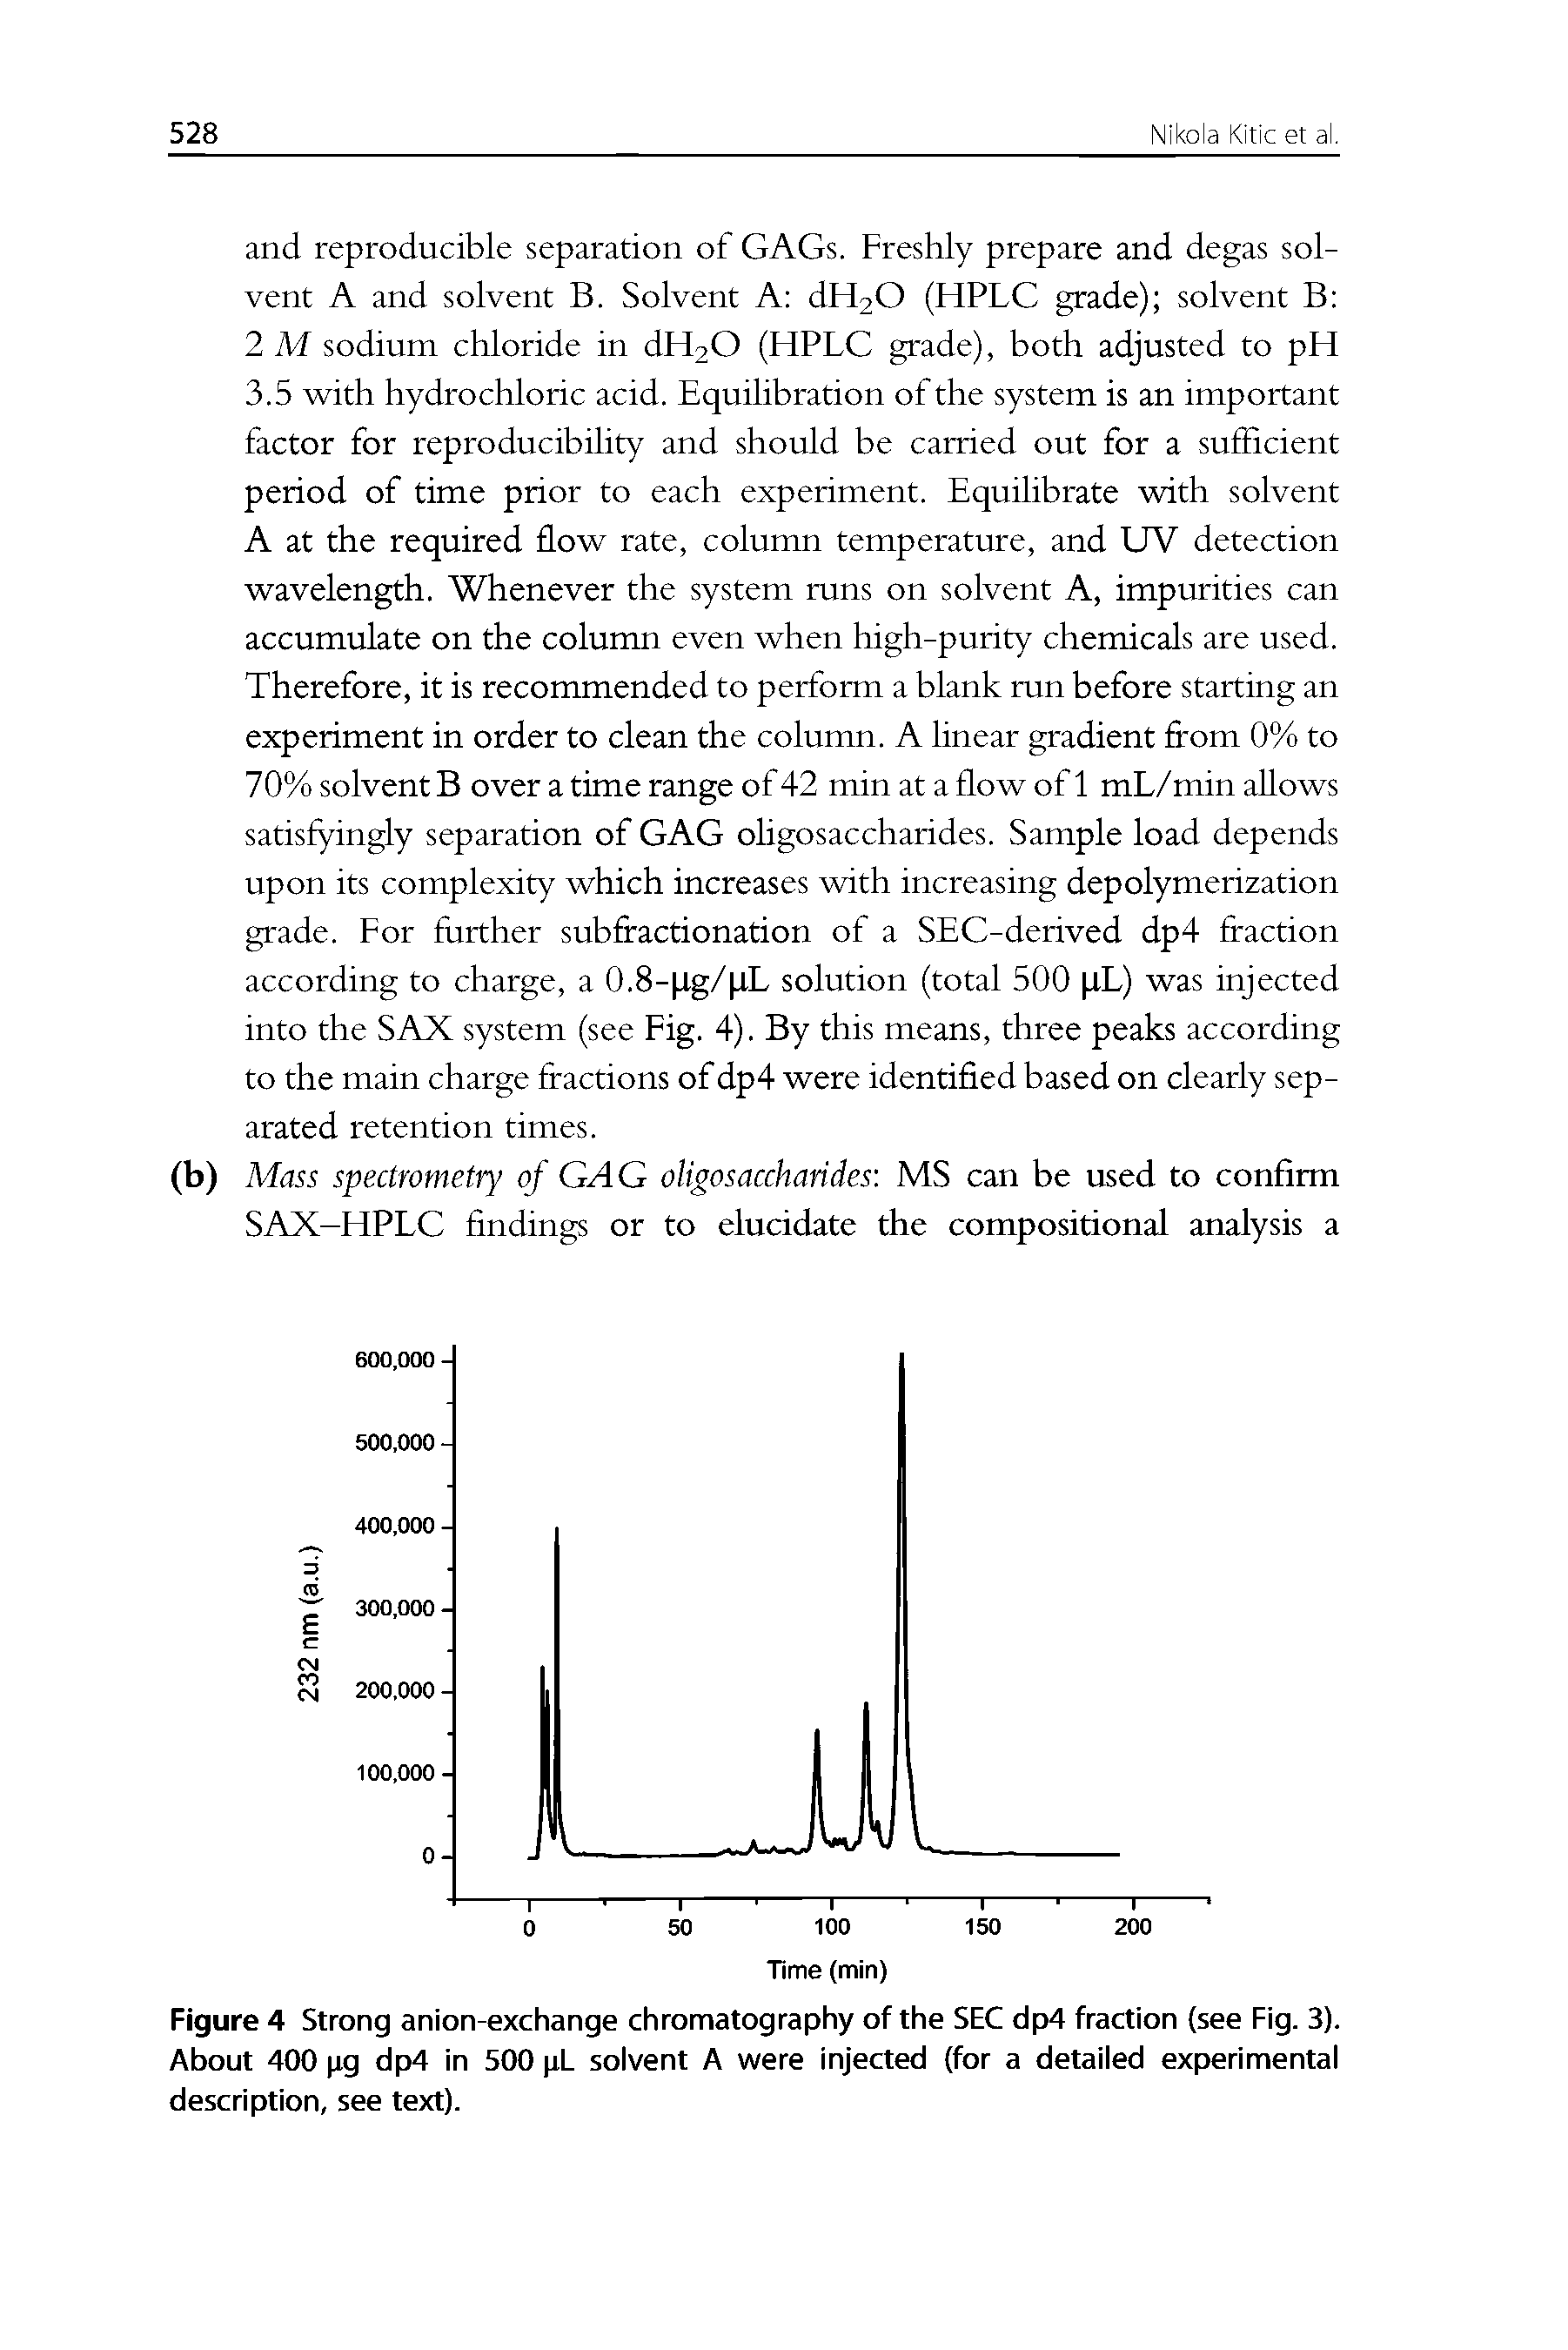 Figure 4 Strong anion-exchange chromatography of the SEC dp4 fraction (see Fig. 3). About 400 pg dp4 in 500 pL solvent A were injected (for a detailed experimental description, see text).